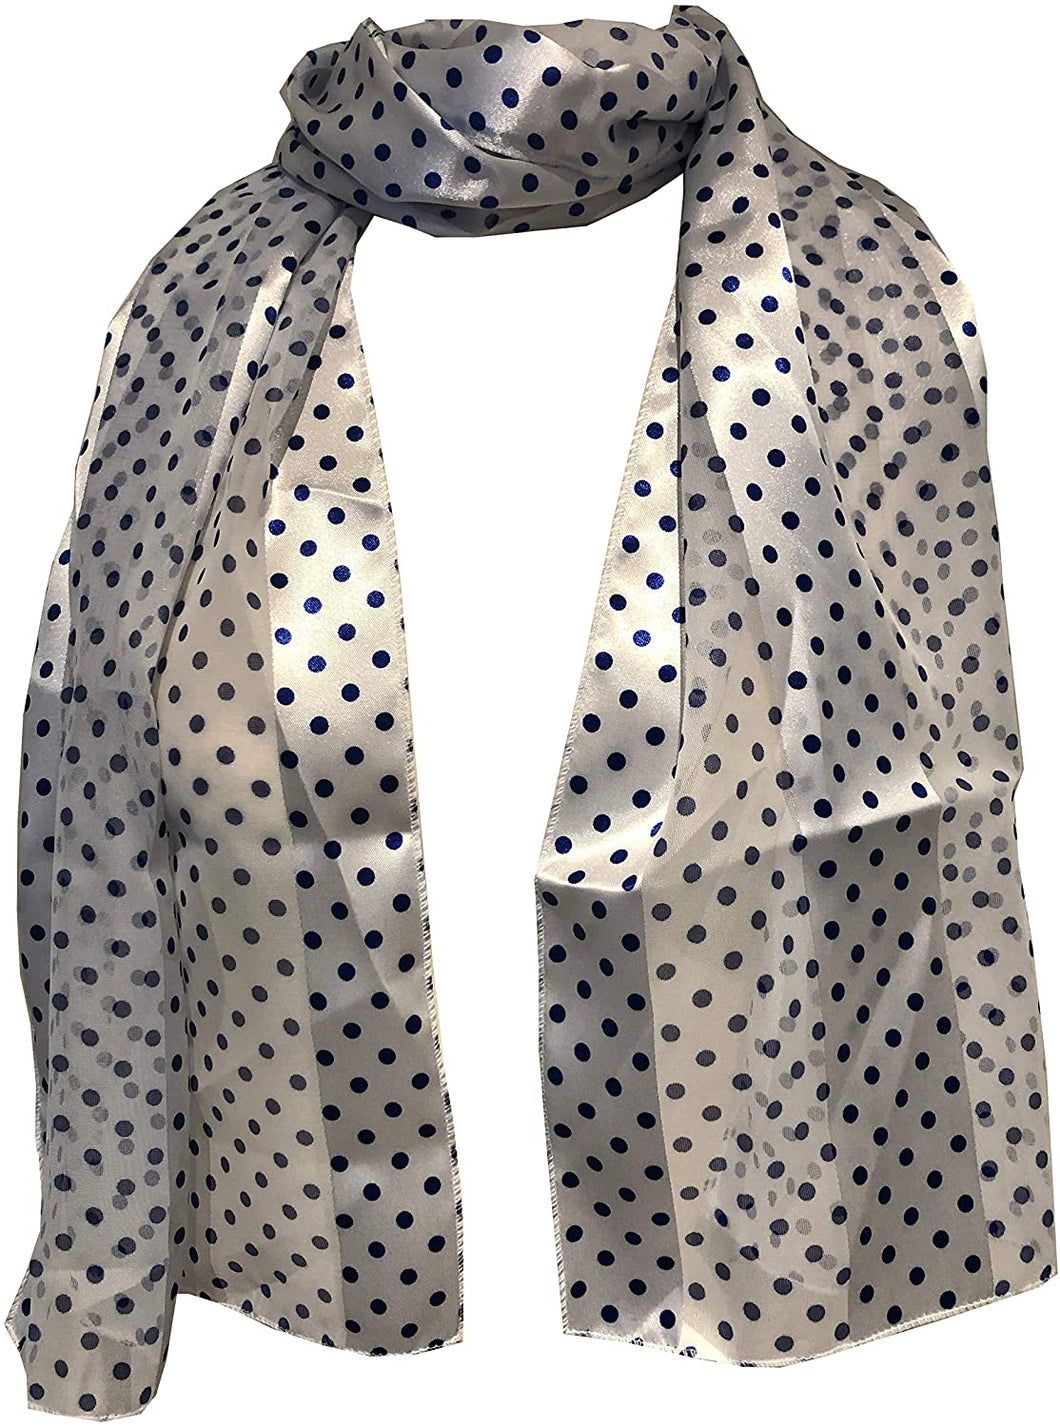 Pamper Yourself Now White with Blue Small spot Thin Pretty Scarf. Lovely with Any Outfit